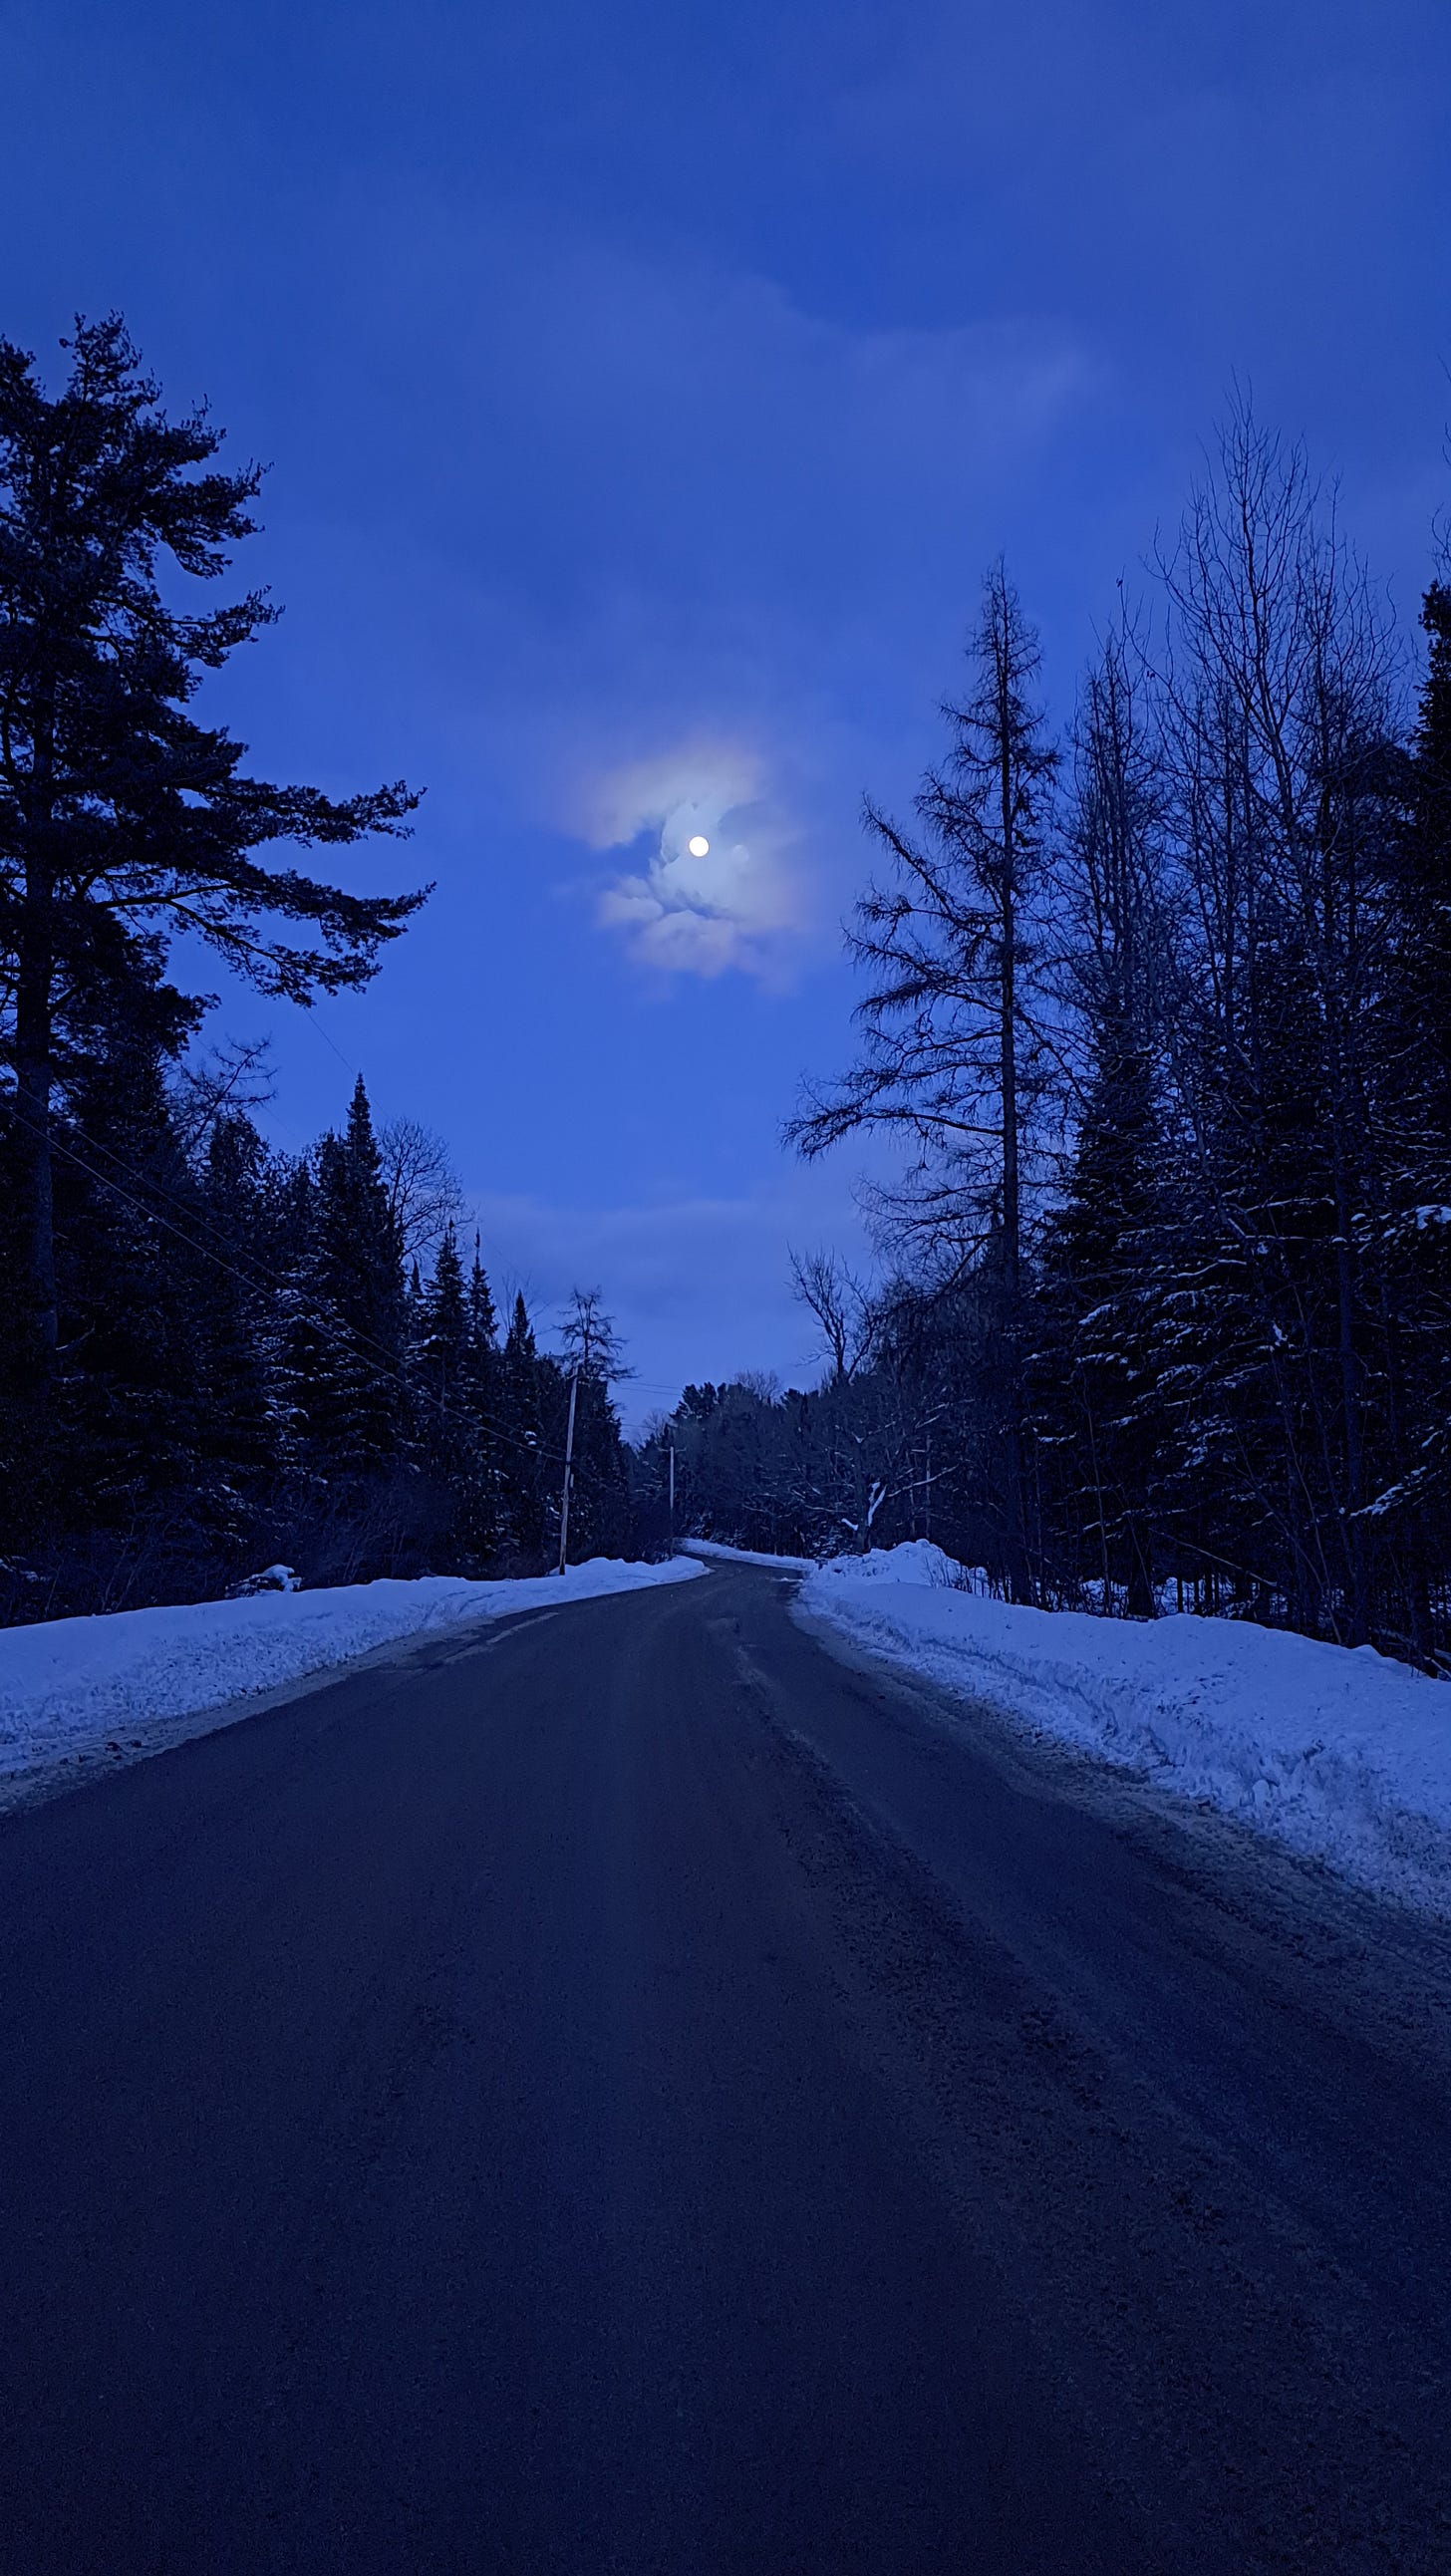 The moon is seen through some light clouds over a quiet country road in the Adirondacks